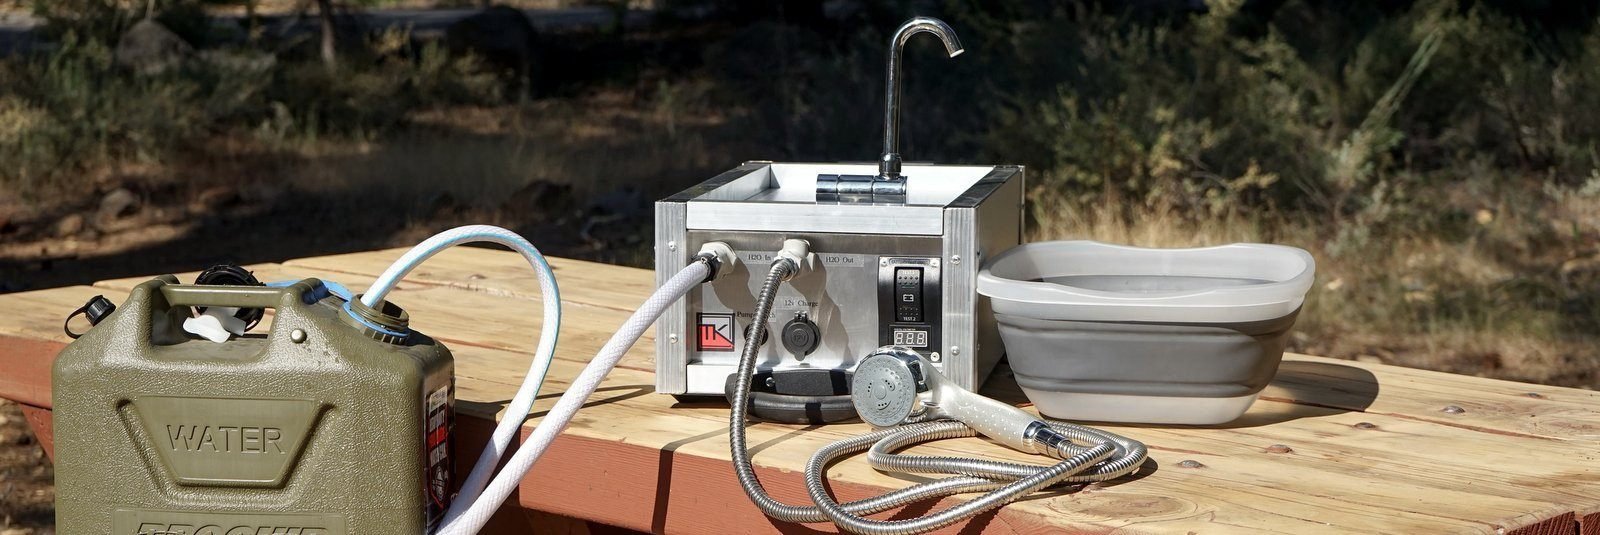 Camping Hot Water Systems - Portable Camping Sinks & Showers